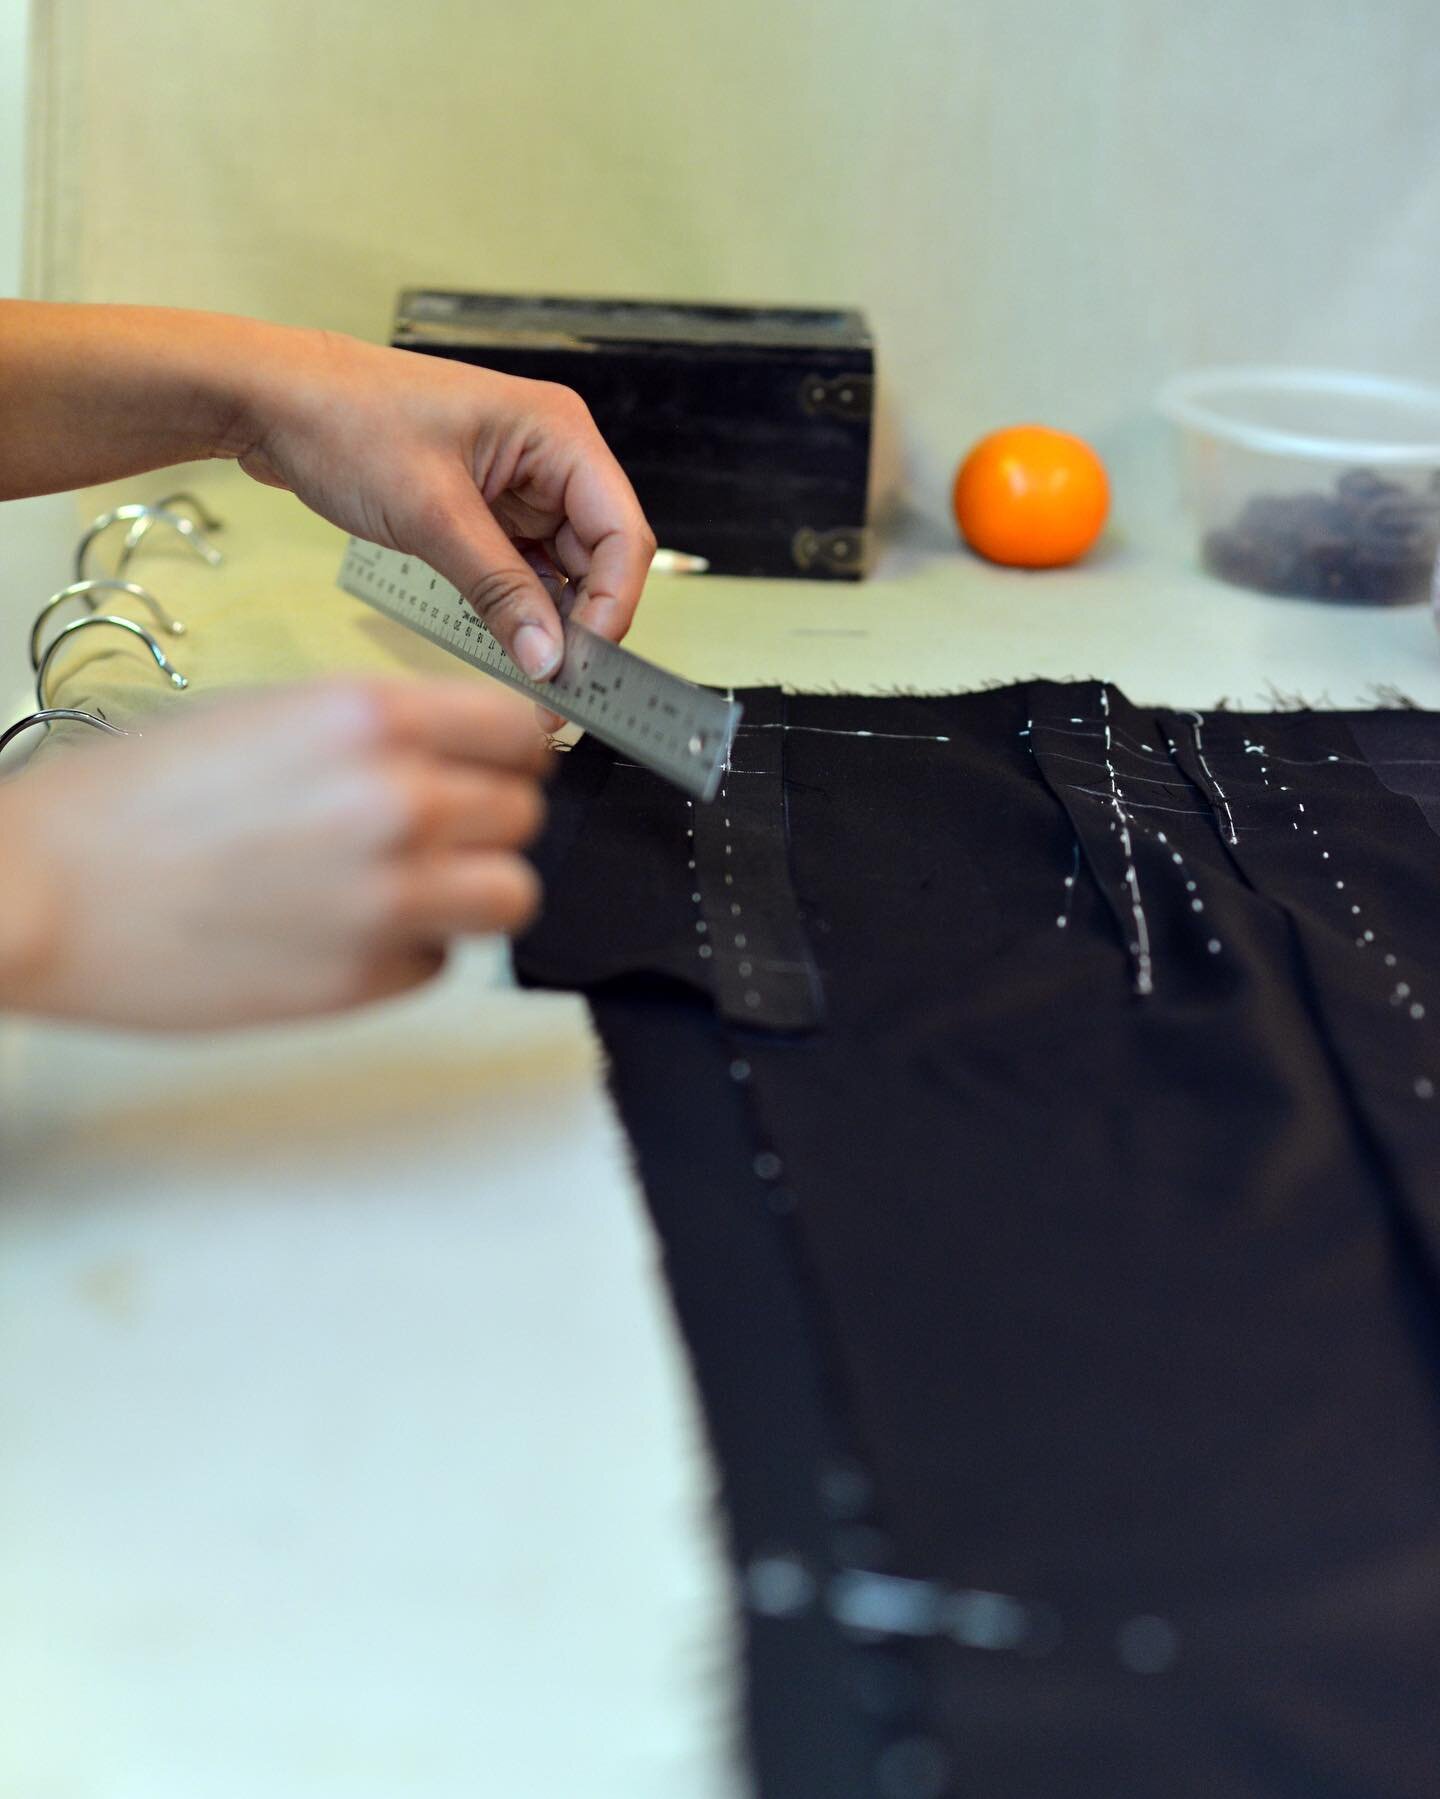 Painstaking work goes into our trouser pockets to give them a seamless appearance, but with hard wearing strength . Reinforcement and careful hand stitching is a slow process to ensure a perfect result